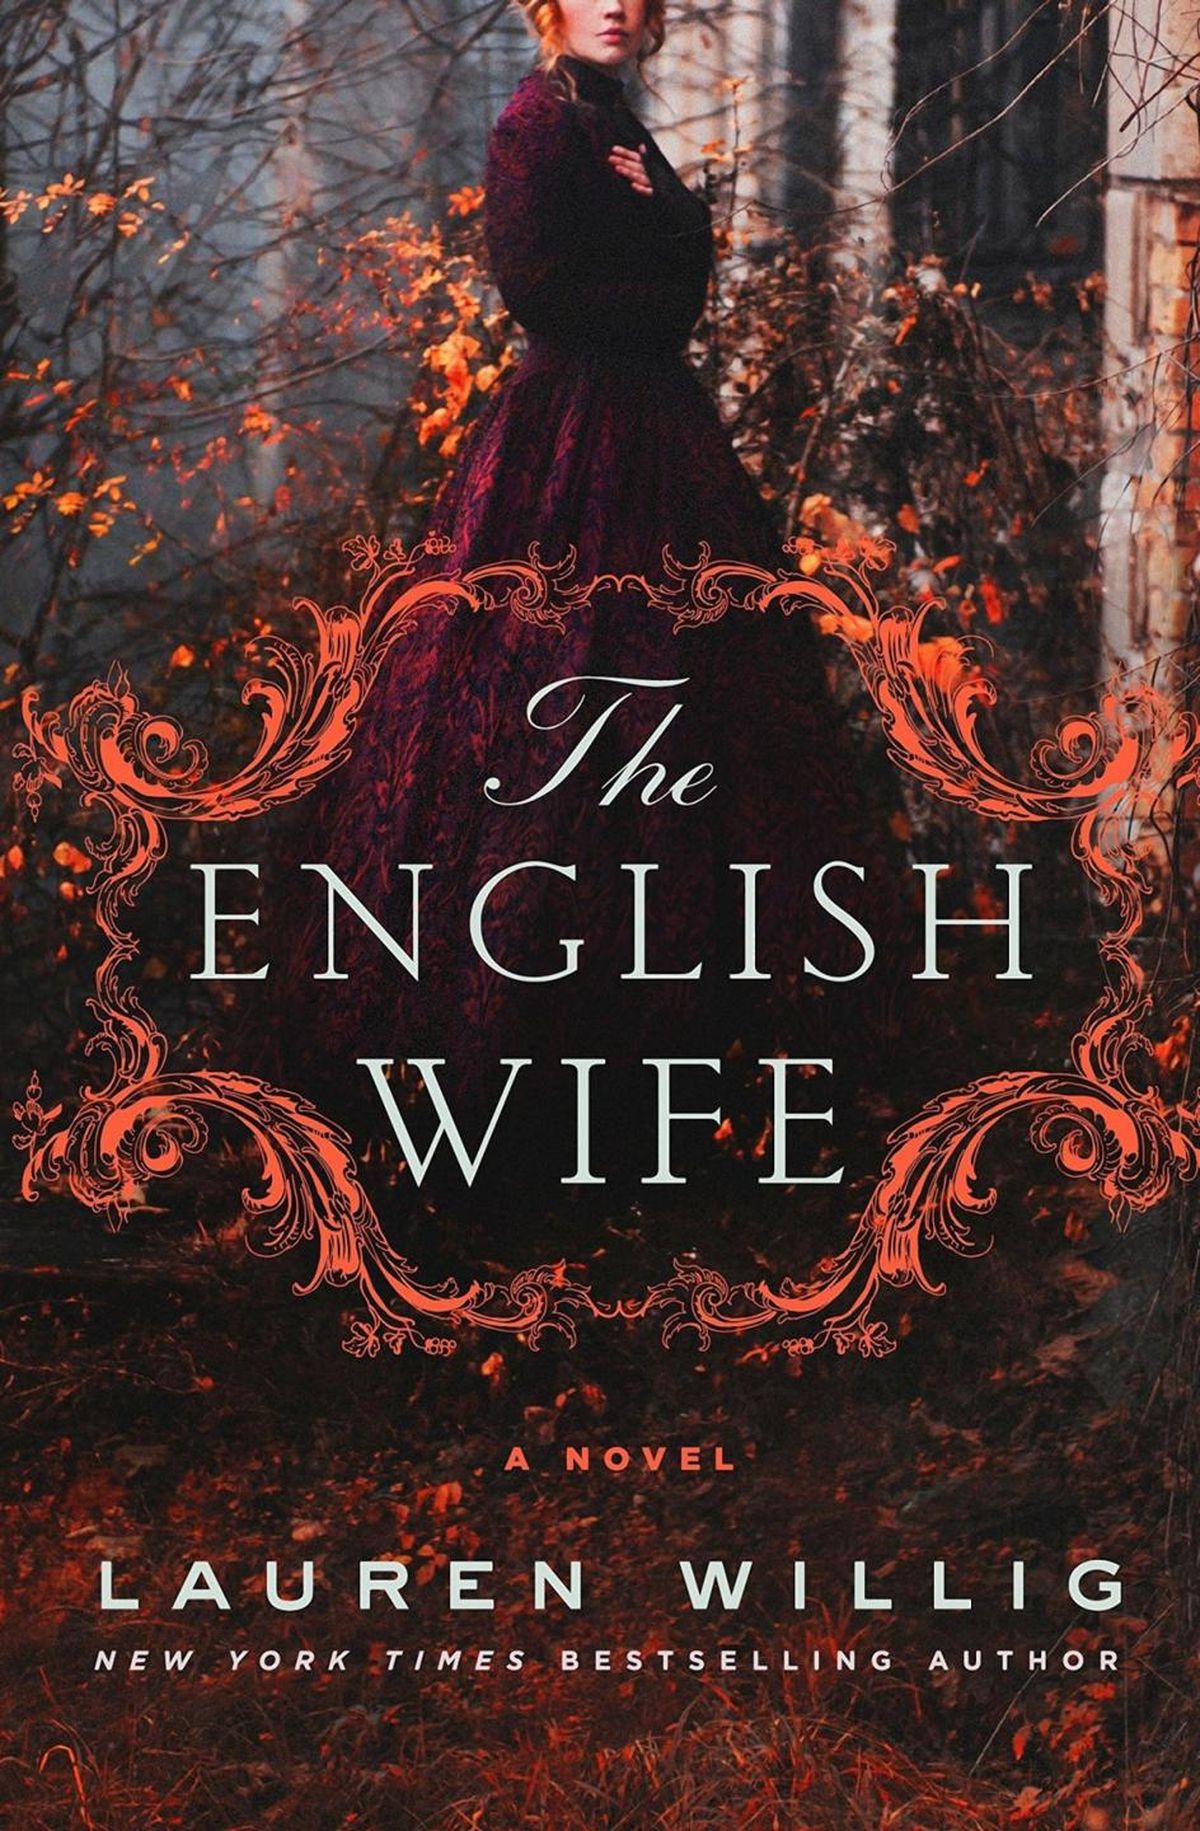 the english wife by lauren willig.jpg